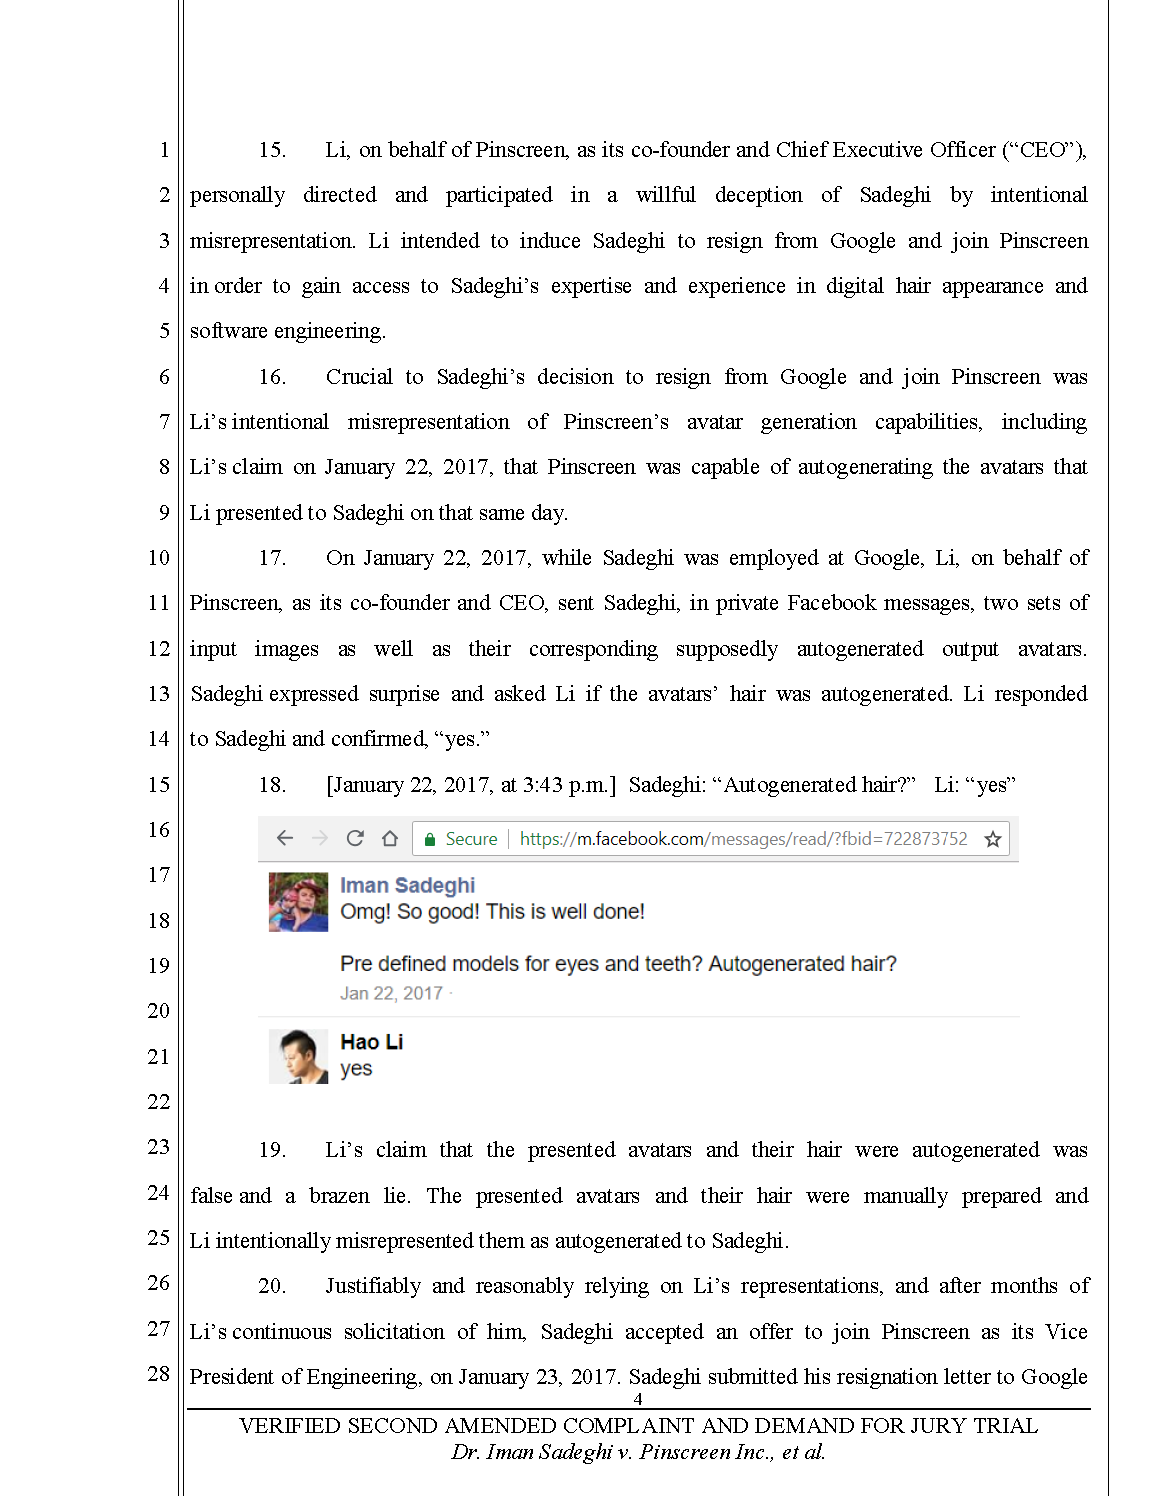 Second Amended Complaint (SAC) Page 5